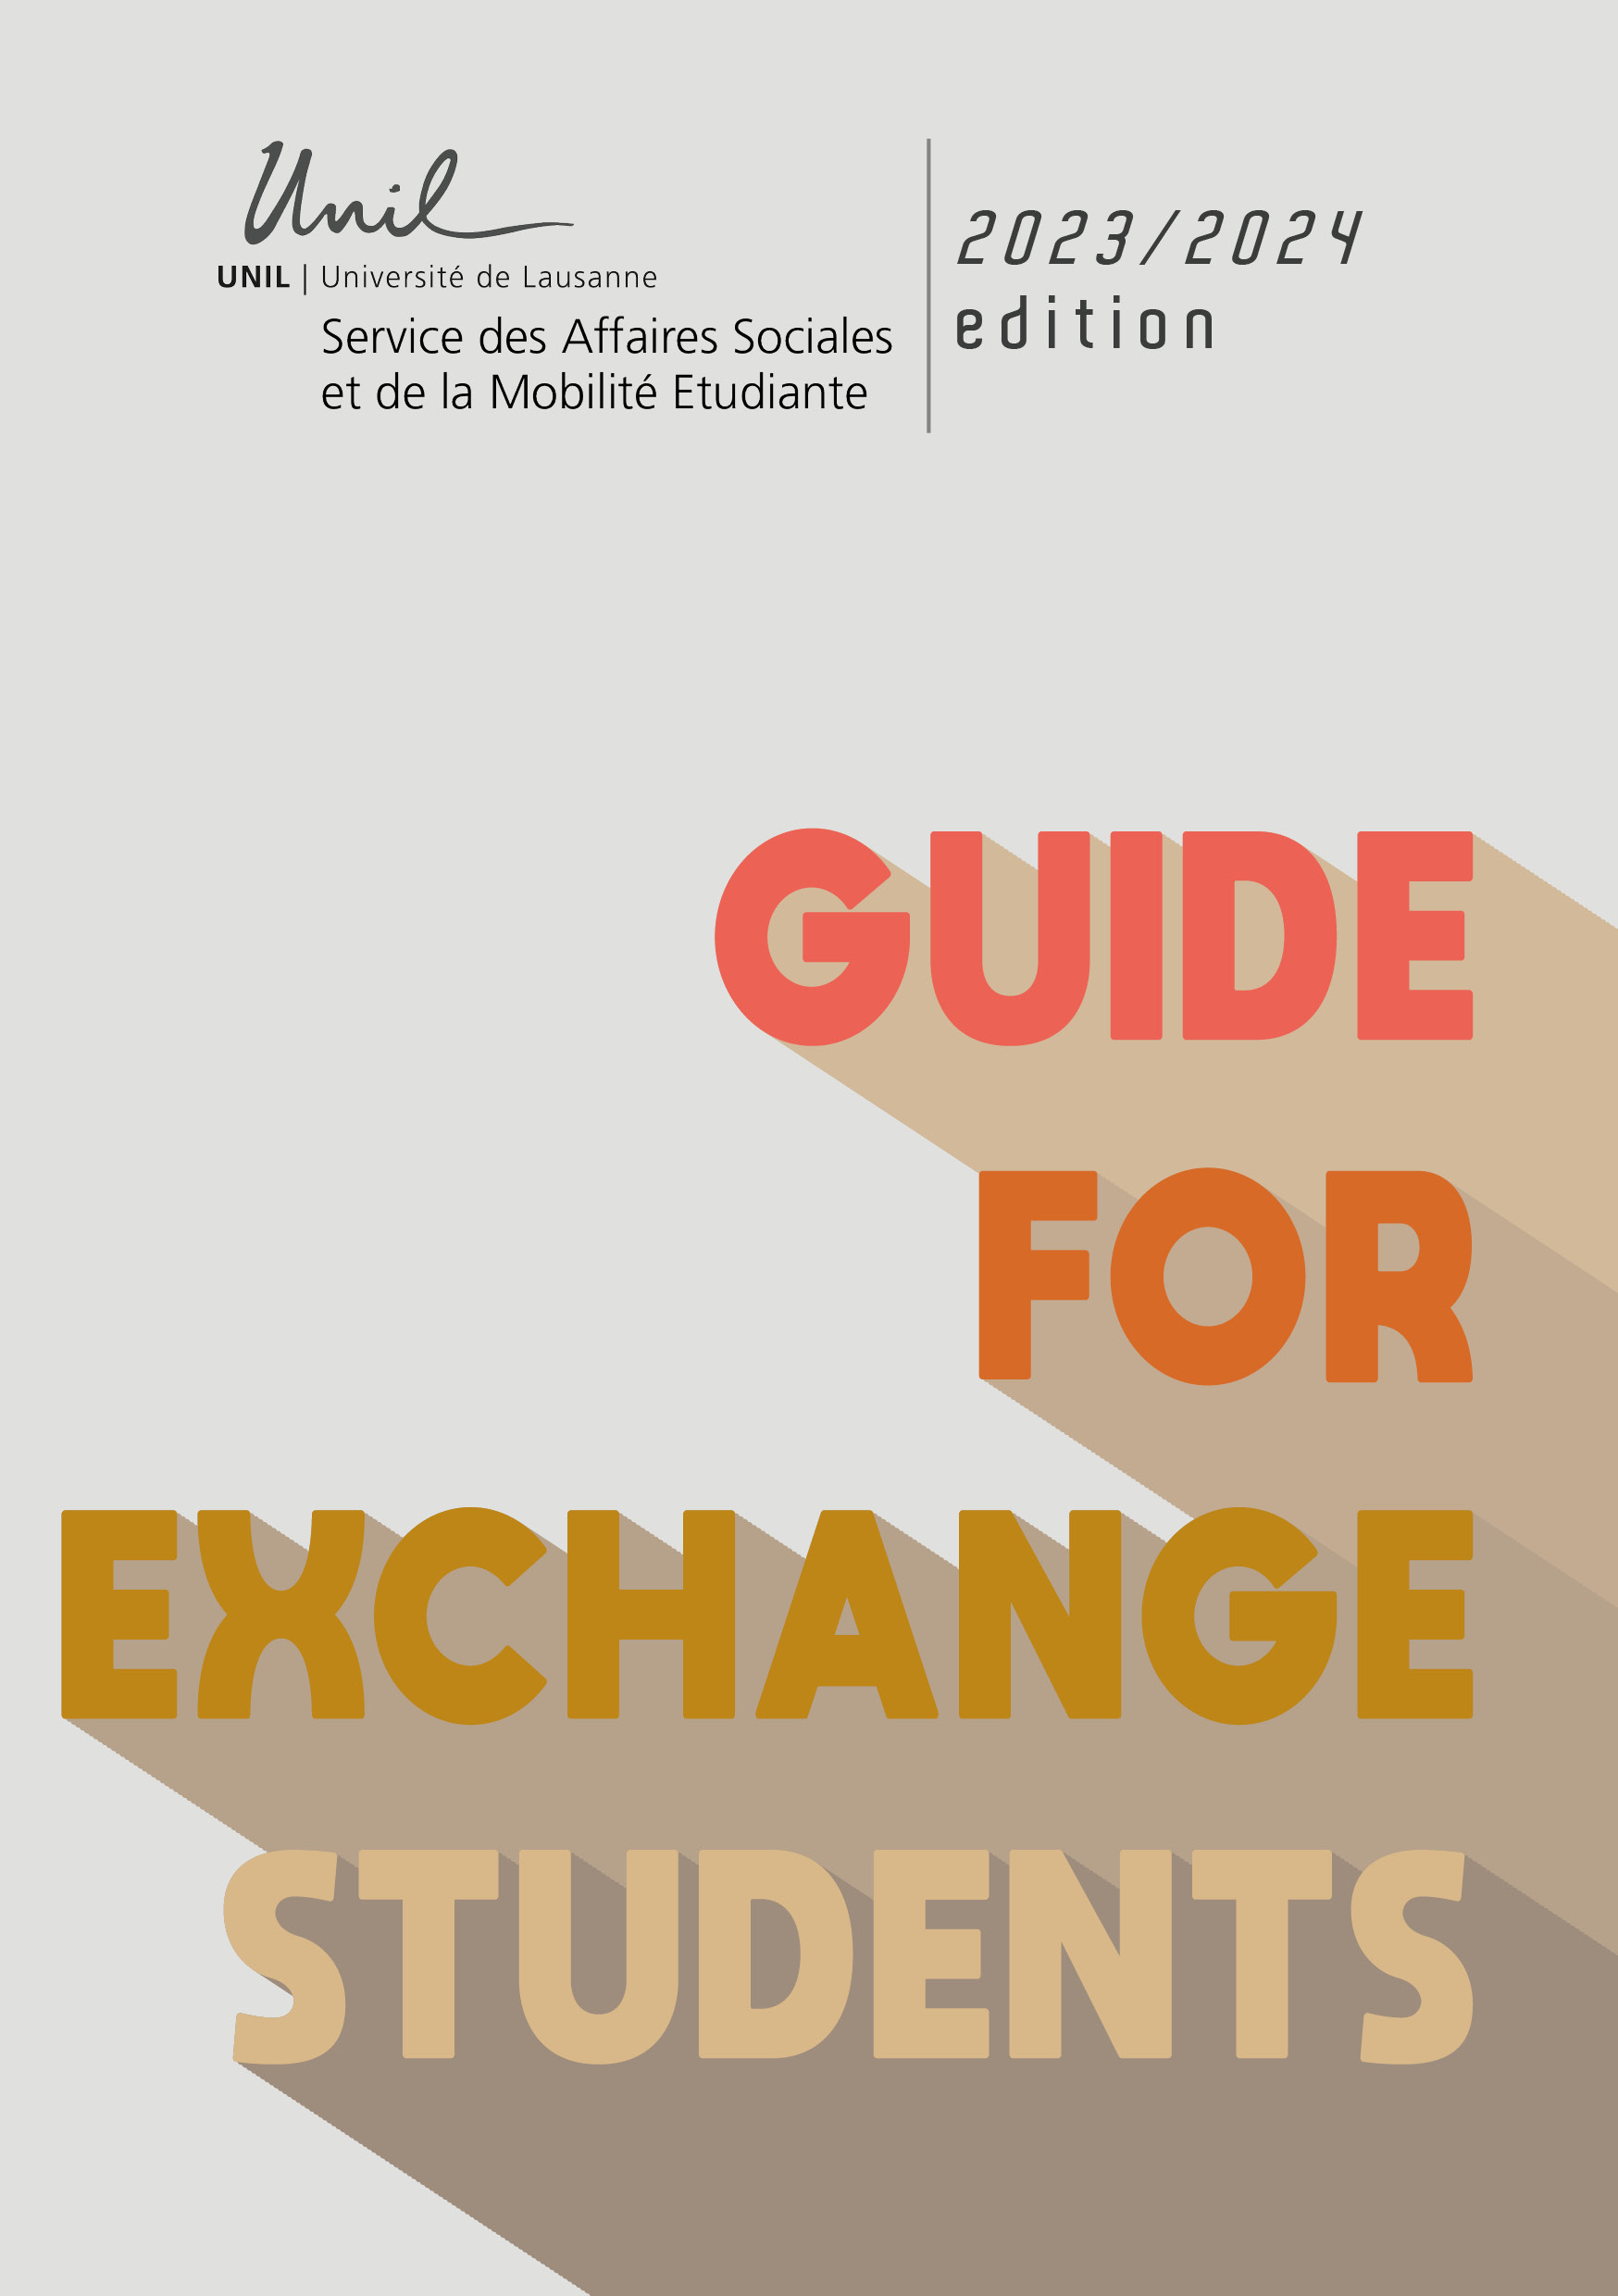 GUIDE FOR EXCHANGE STUDENT_2023.jpg